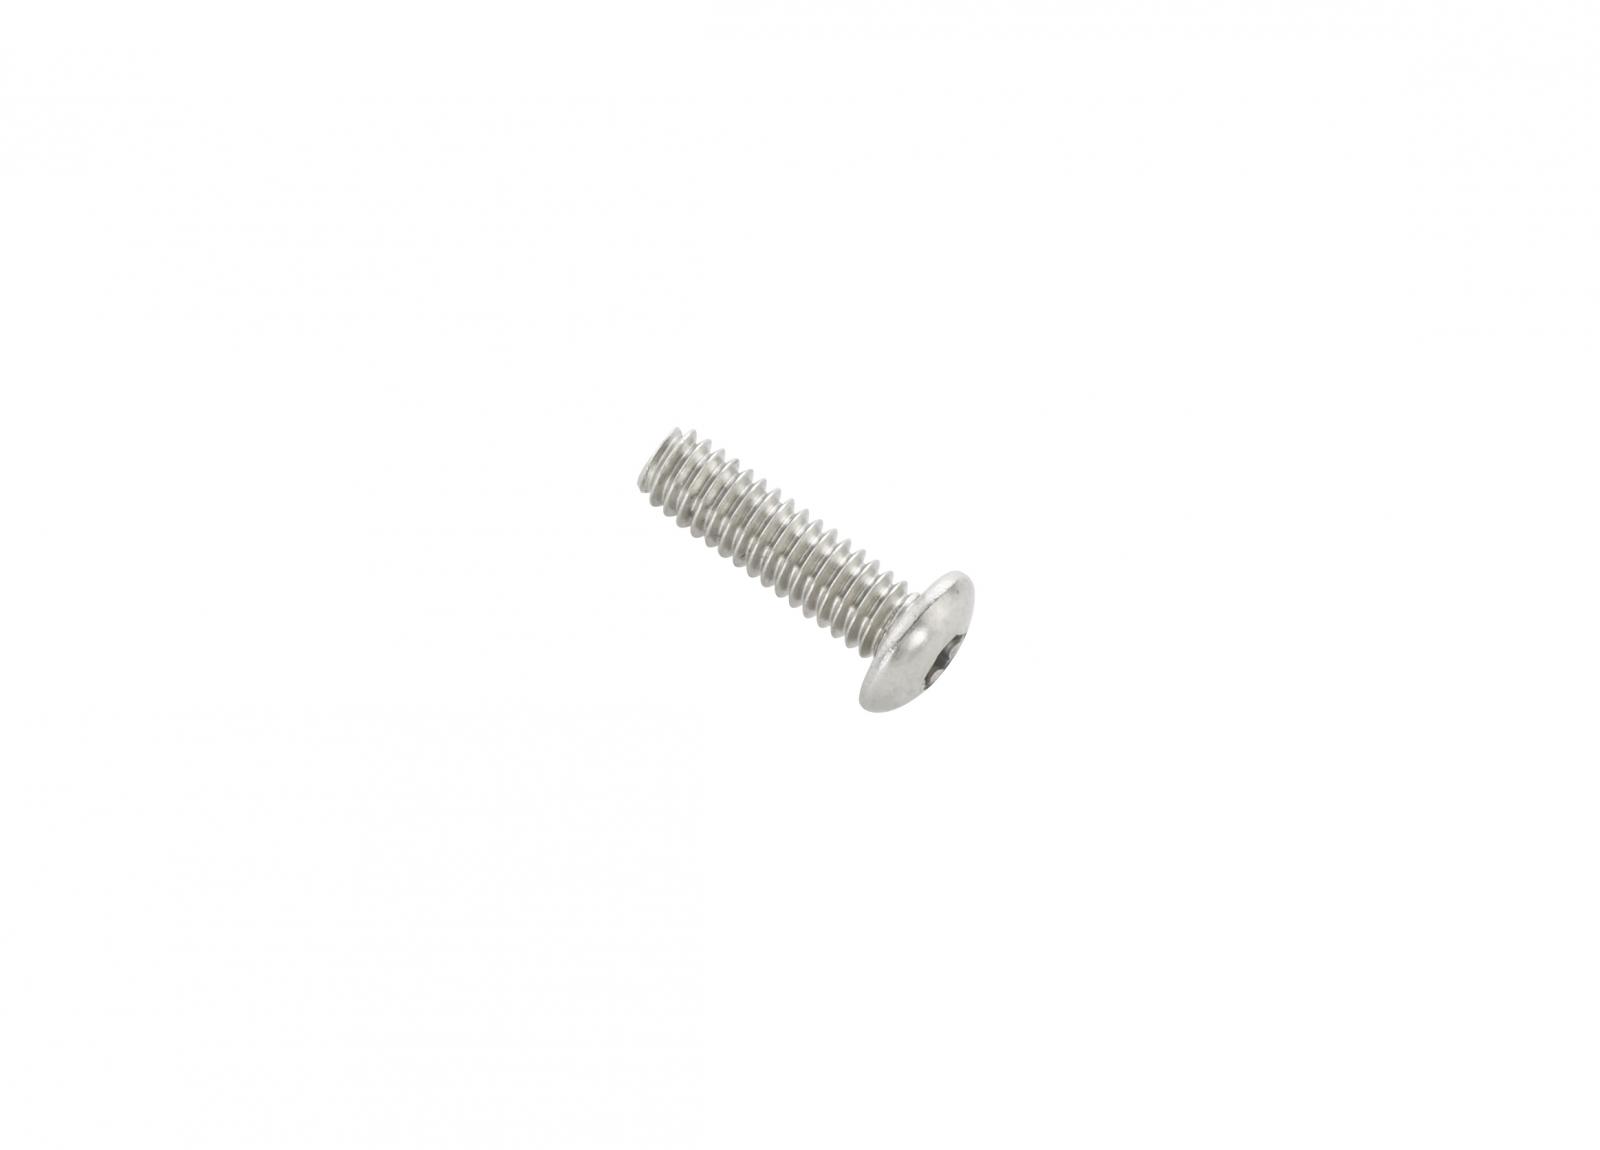 TapeTech® 8-32 x 9/16 Button Head Screw. Part number 149025